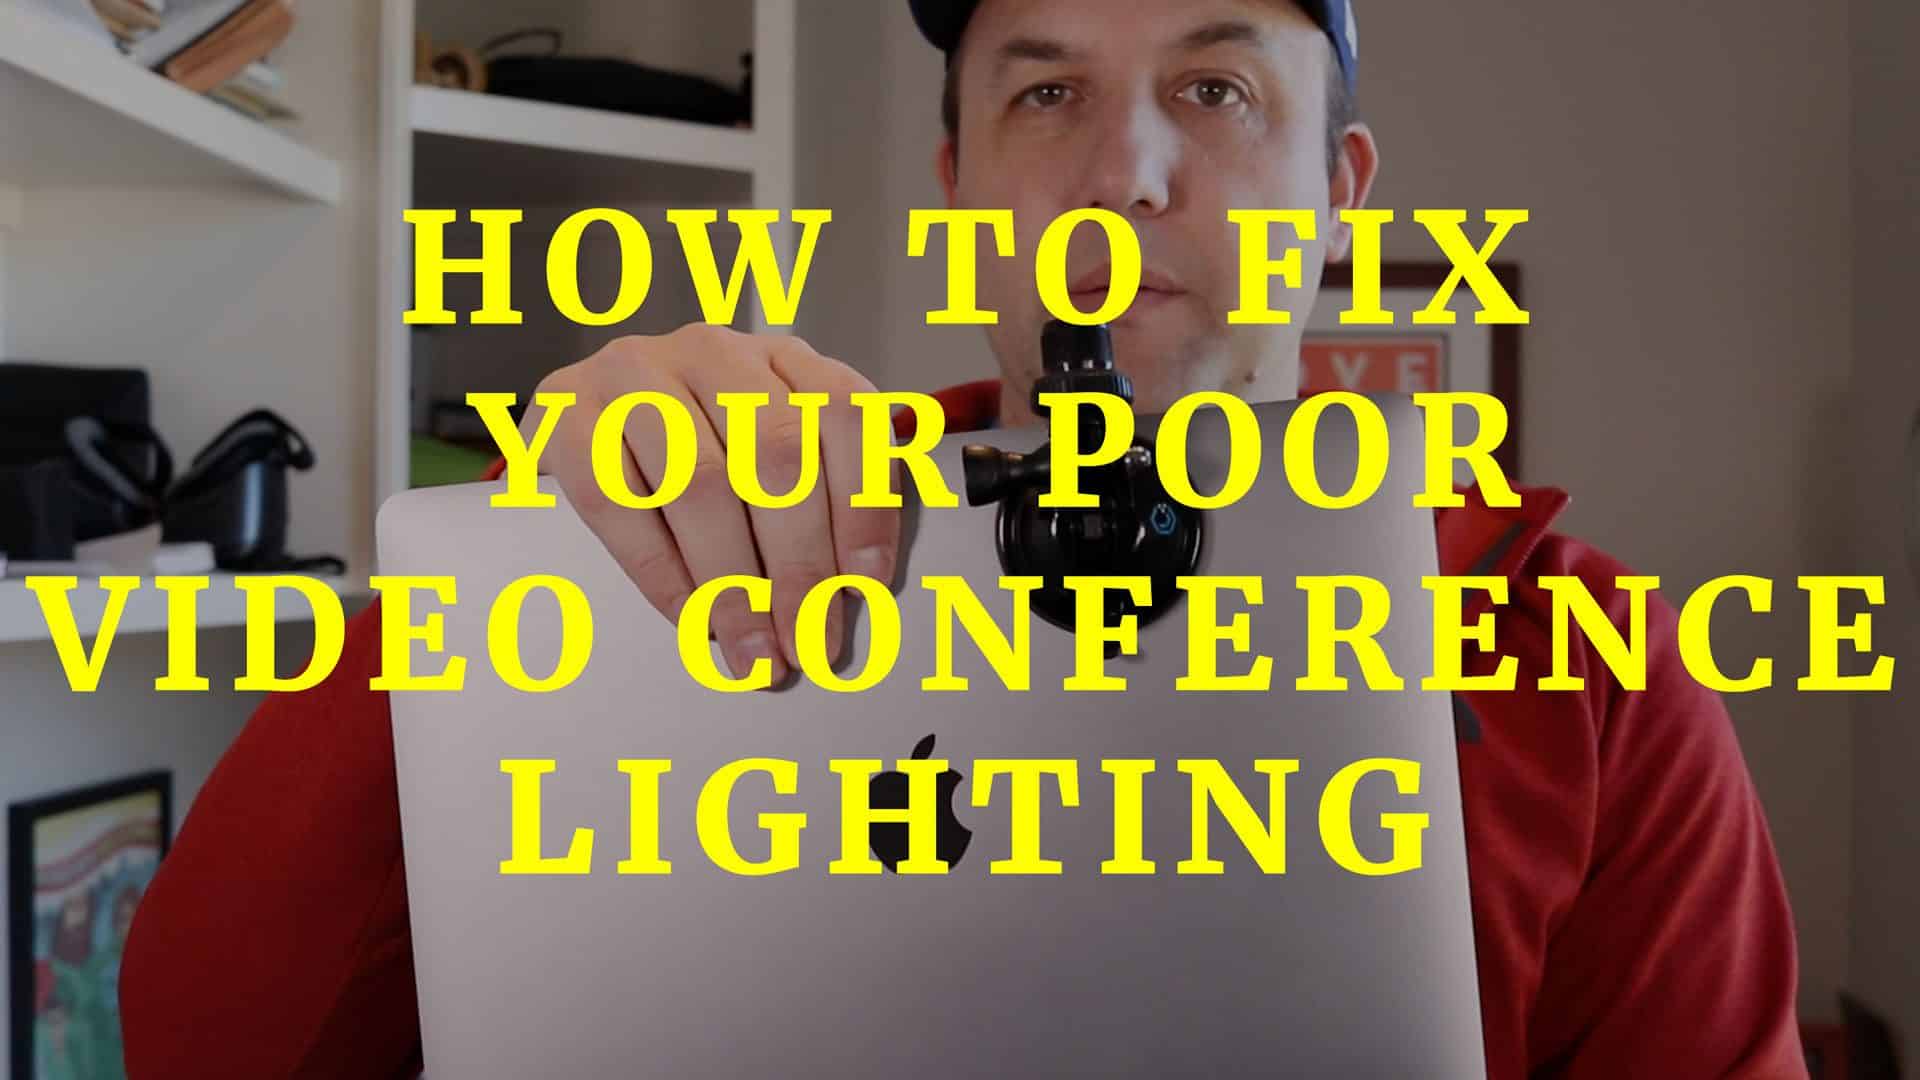 Poor-Video-Conference-Lighting-Portable-lighting-kit-solution-for-improving-your-poor-video-conference-lighting